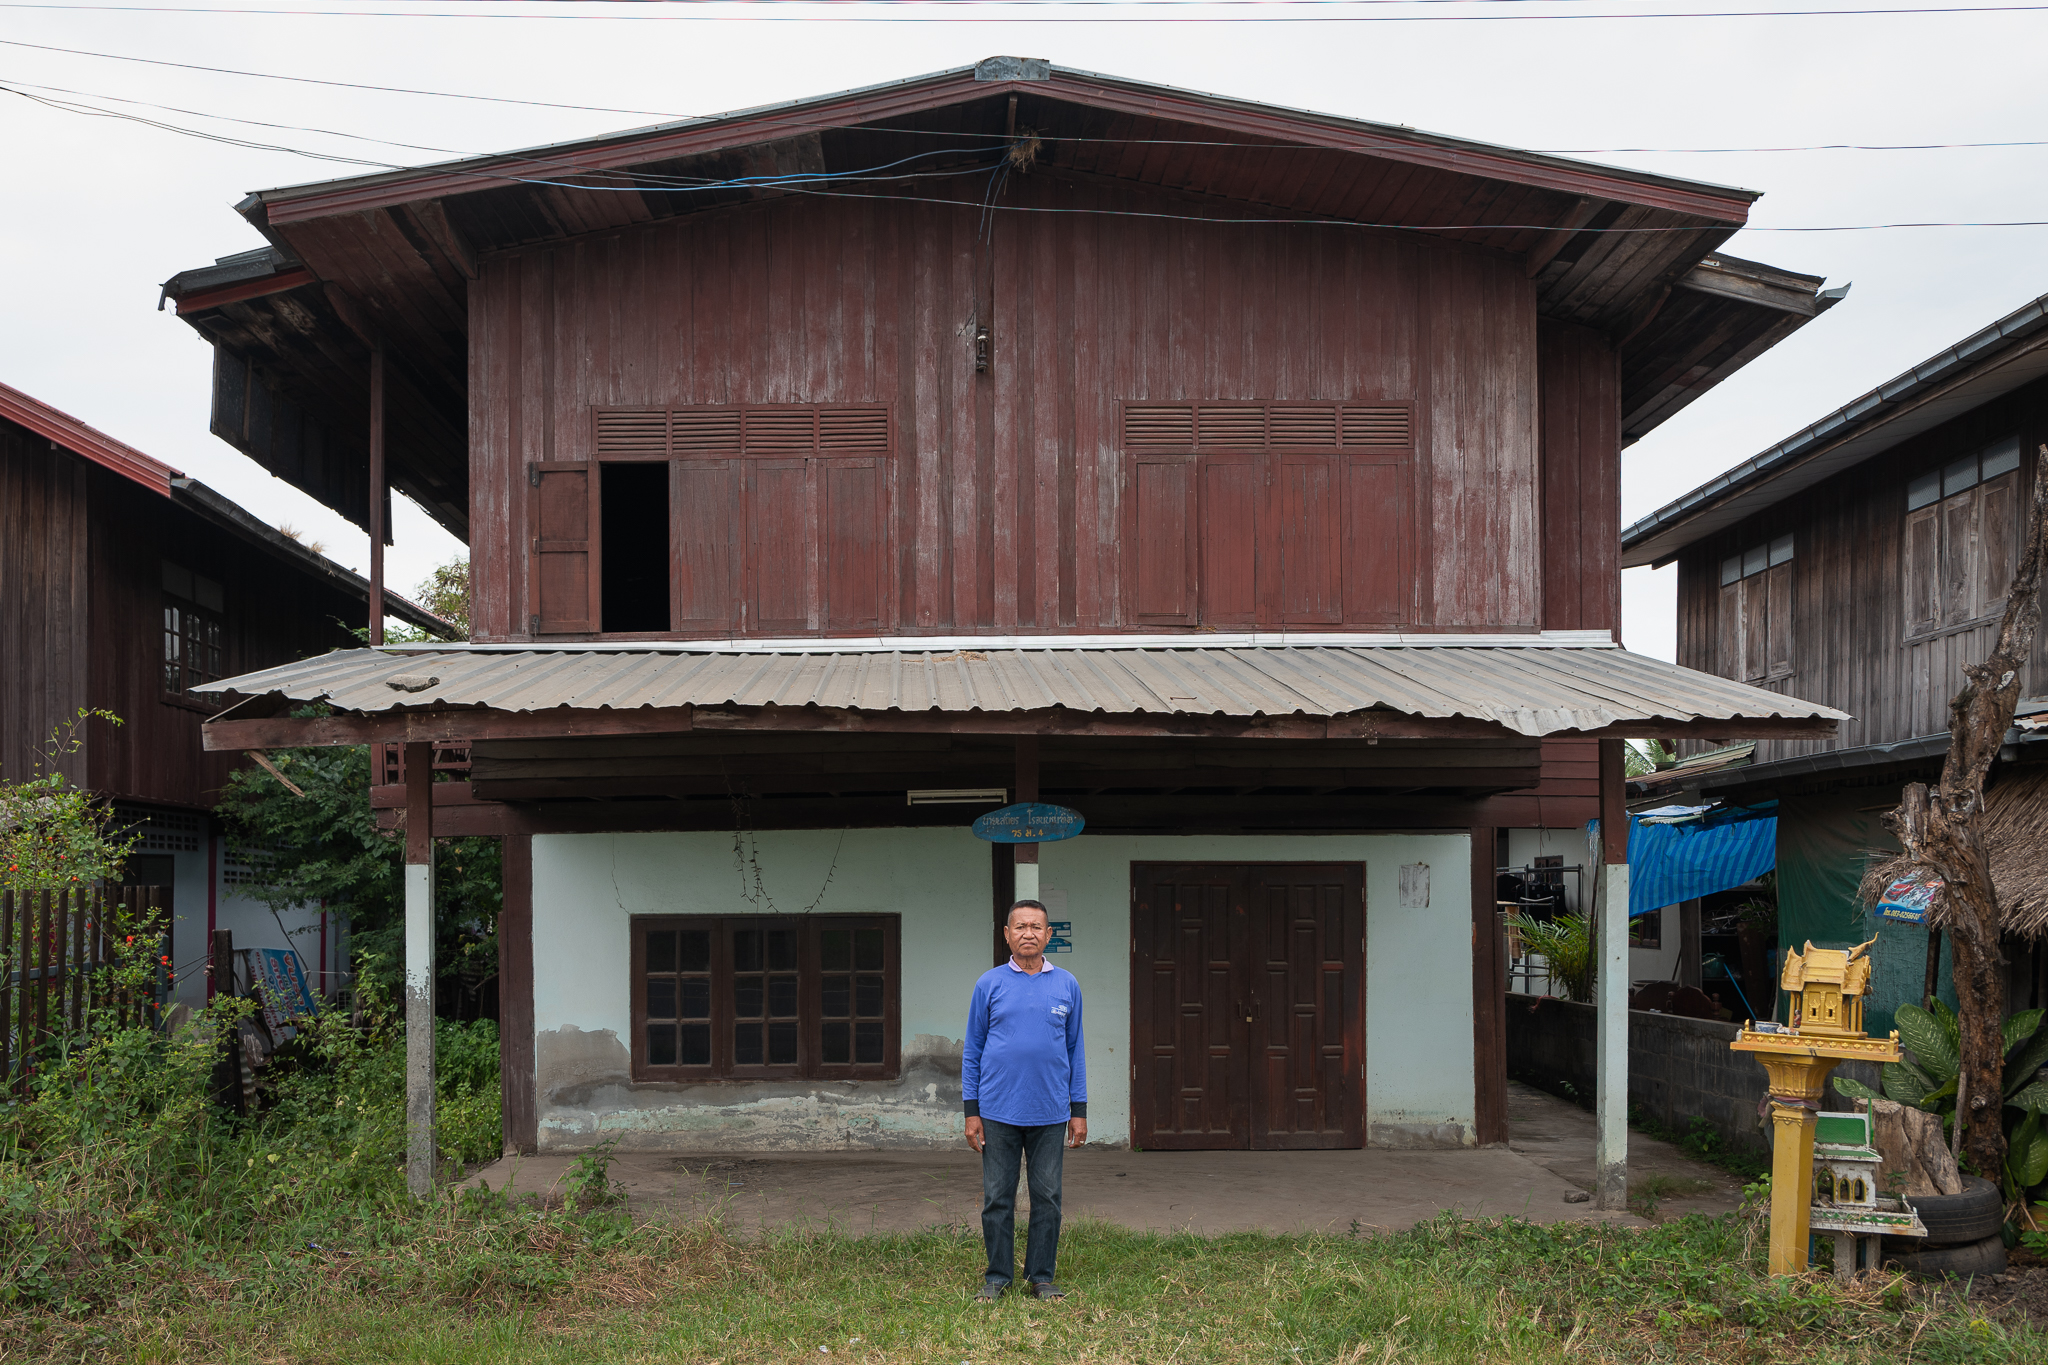 Satien Rojanabundit is pictured outside his father's former home in Buriram Province, Thailand, on Nov. 5, 2022. Rojanabundit was a child when art collector Douglas Latchford came to the village to purchase artifacts looted from the nearby Plai Bat II temple. Latchford used the house as a base of operations with Bangkok buyer named Boonlerd. (Photo by Athikhom Saengchai/Special to The Denver Post)